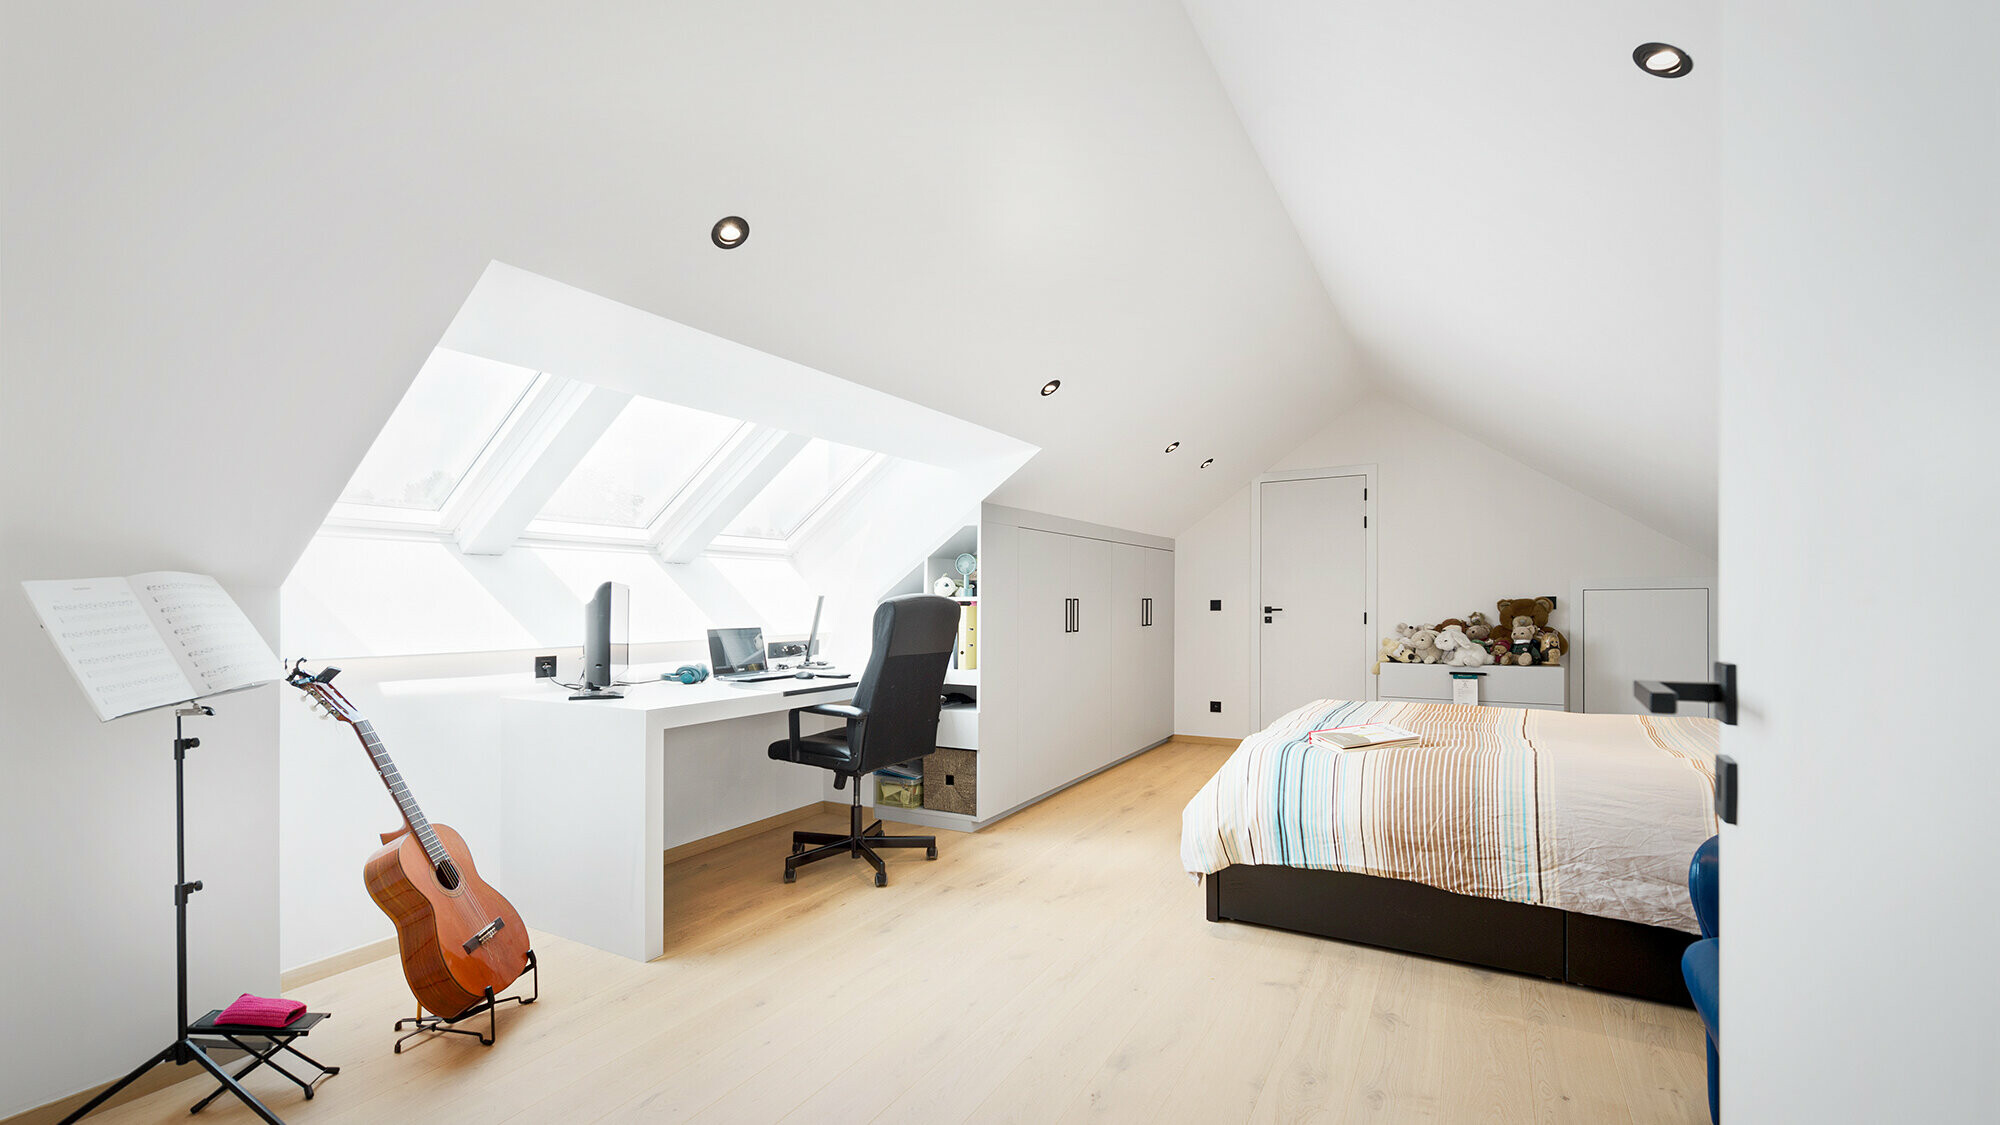 Interior view of one of the light rooms in the attic with a bed, desk, guitar and music stand.